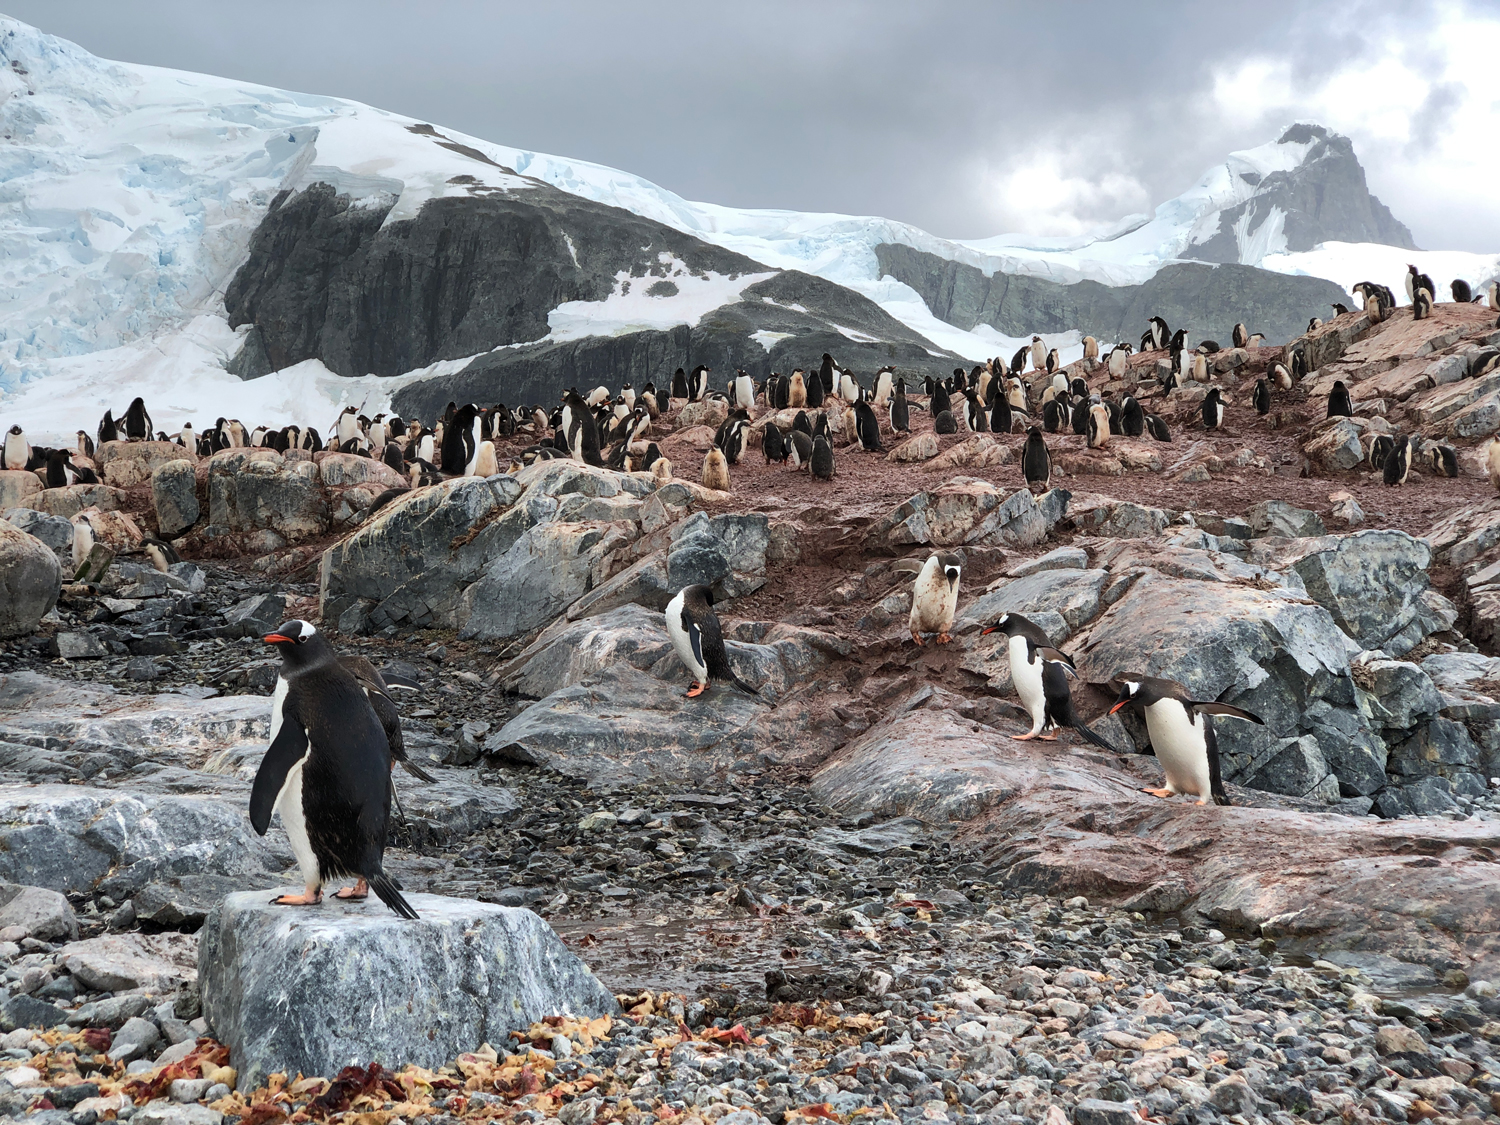 A JPEG photo from an iPhone of a Gentoo penguin colony